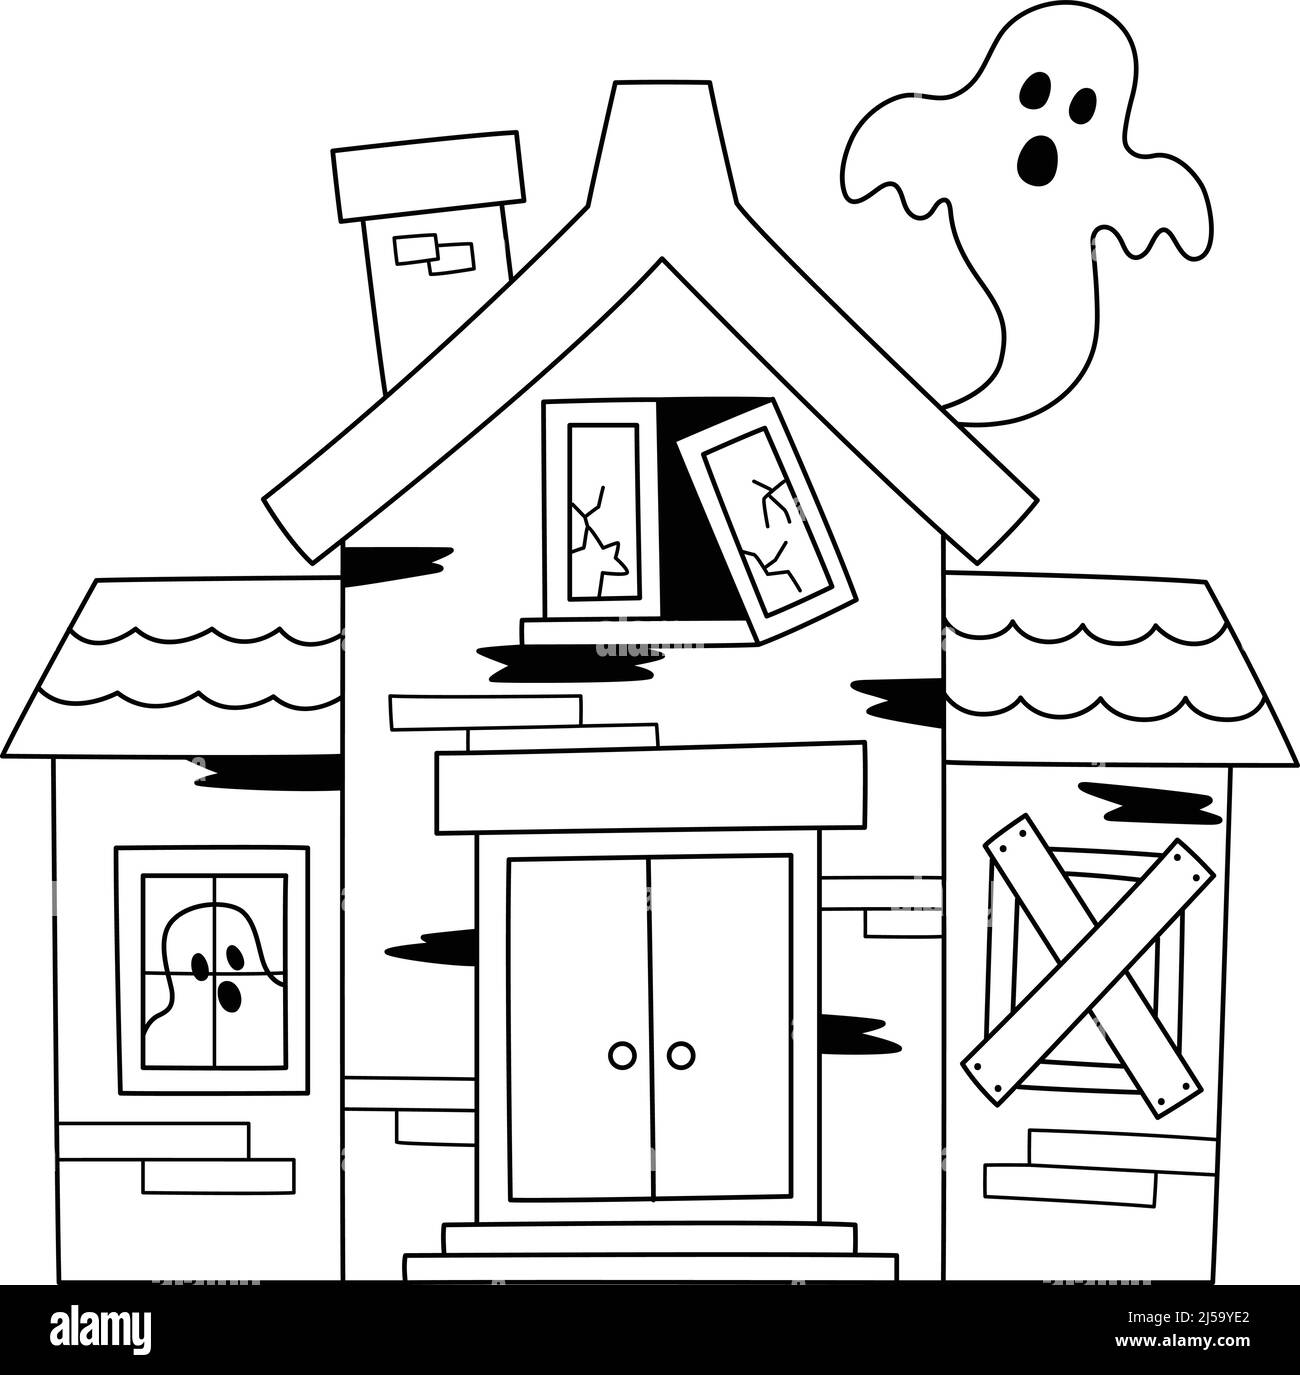 Haunted house halloween coloring page isolated stock vector image art